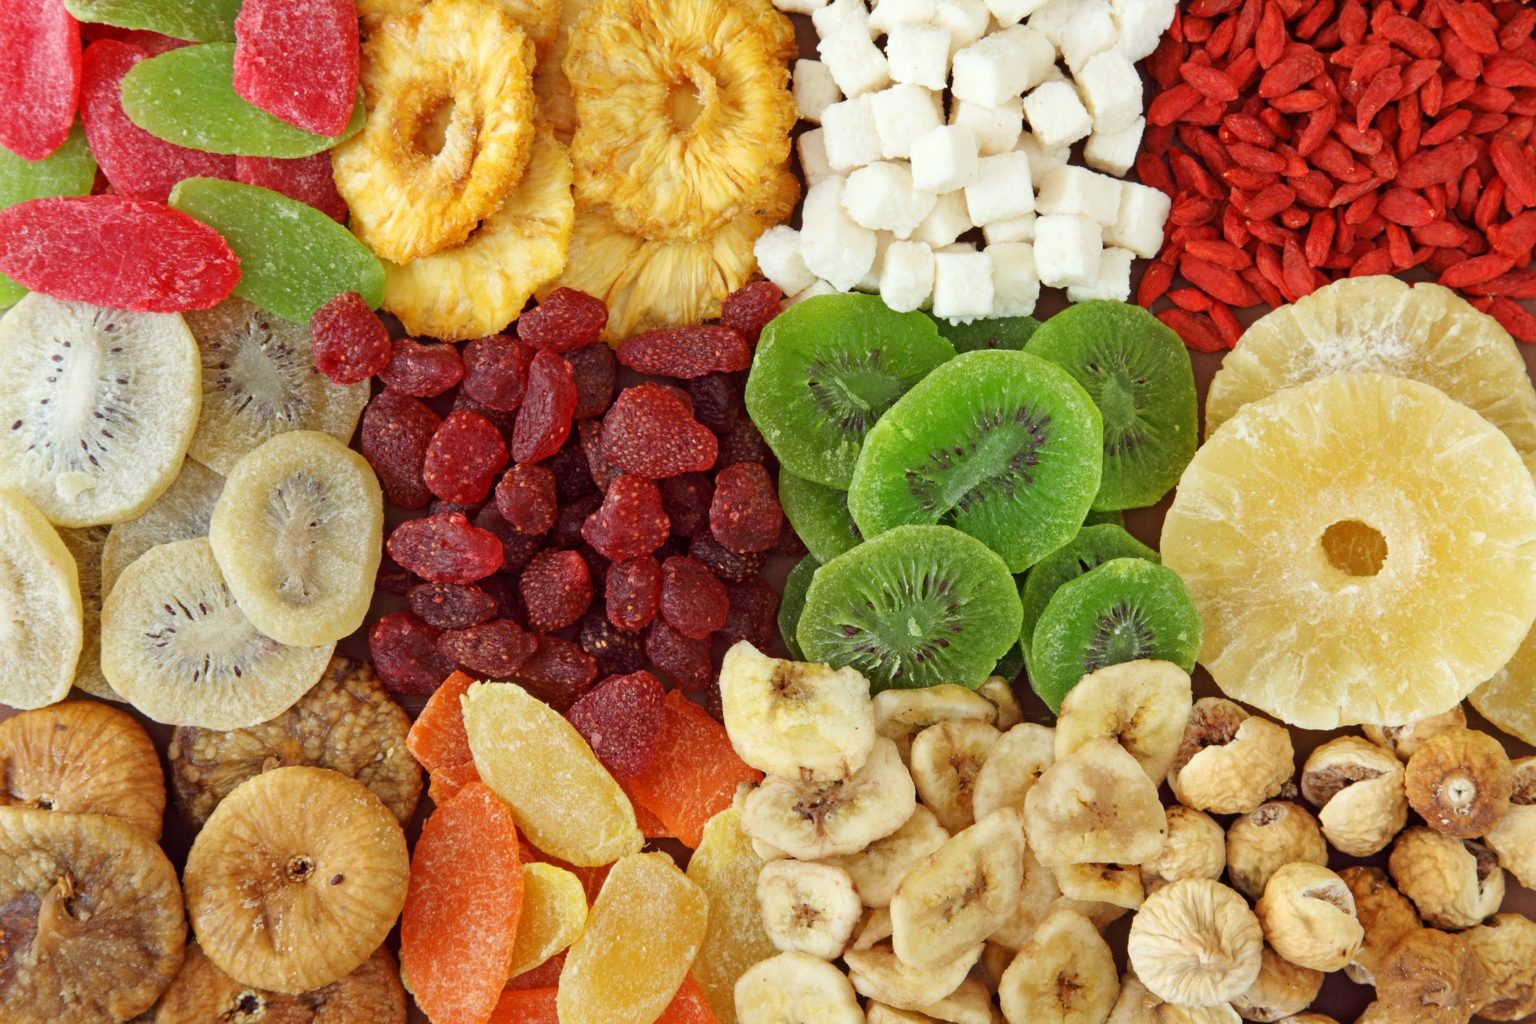 types-of-dried-fruits-know-your-food-ultimate-guide-to-everything